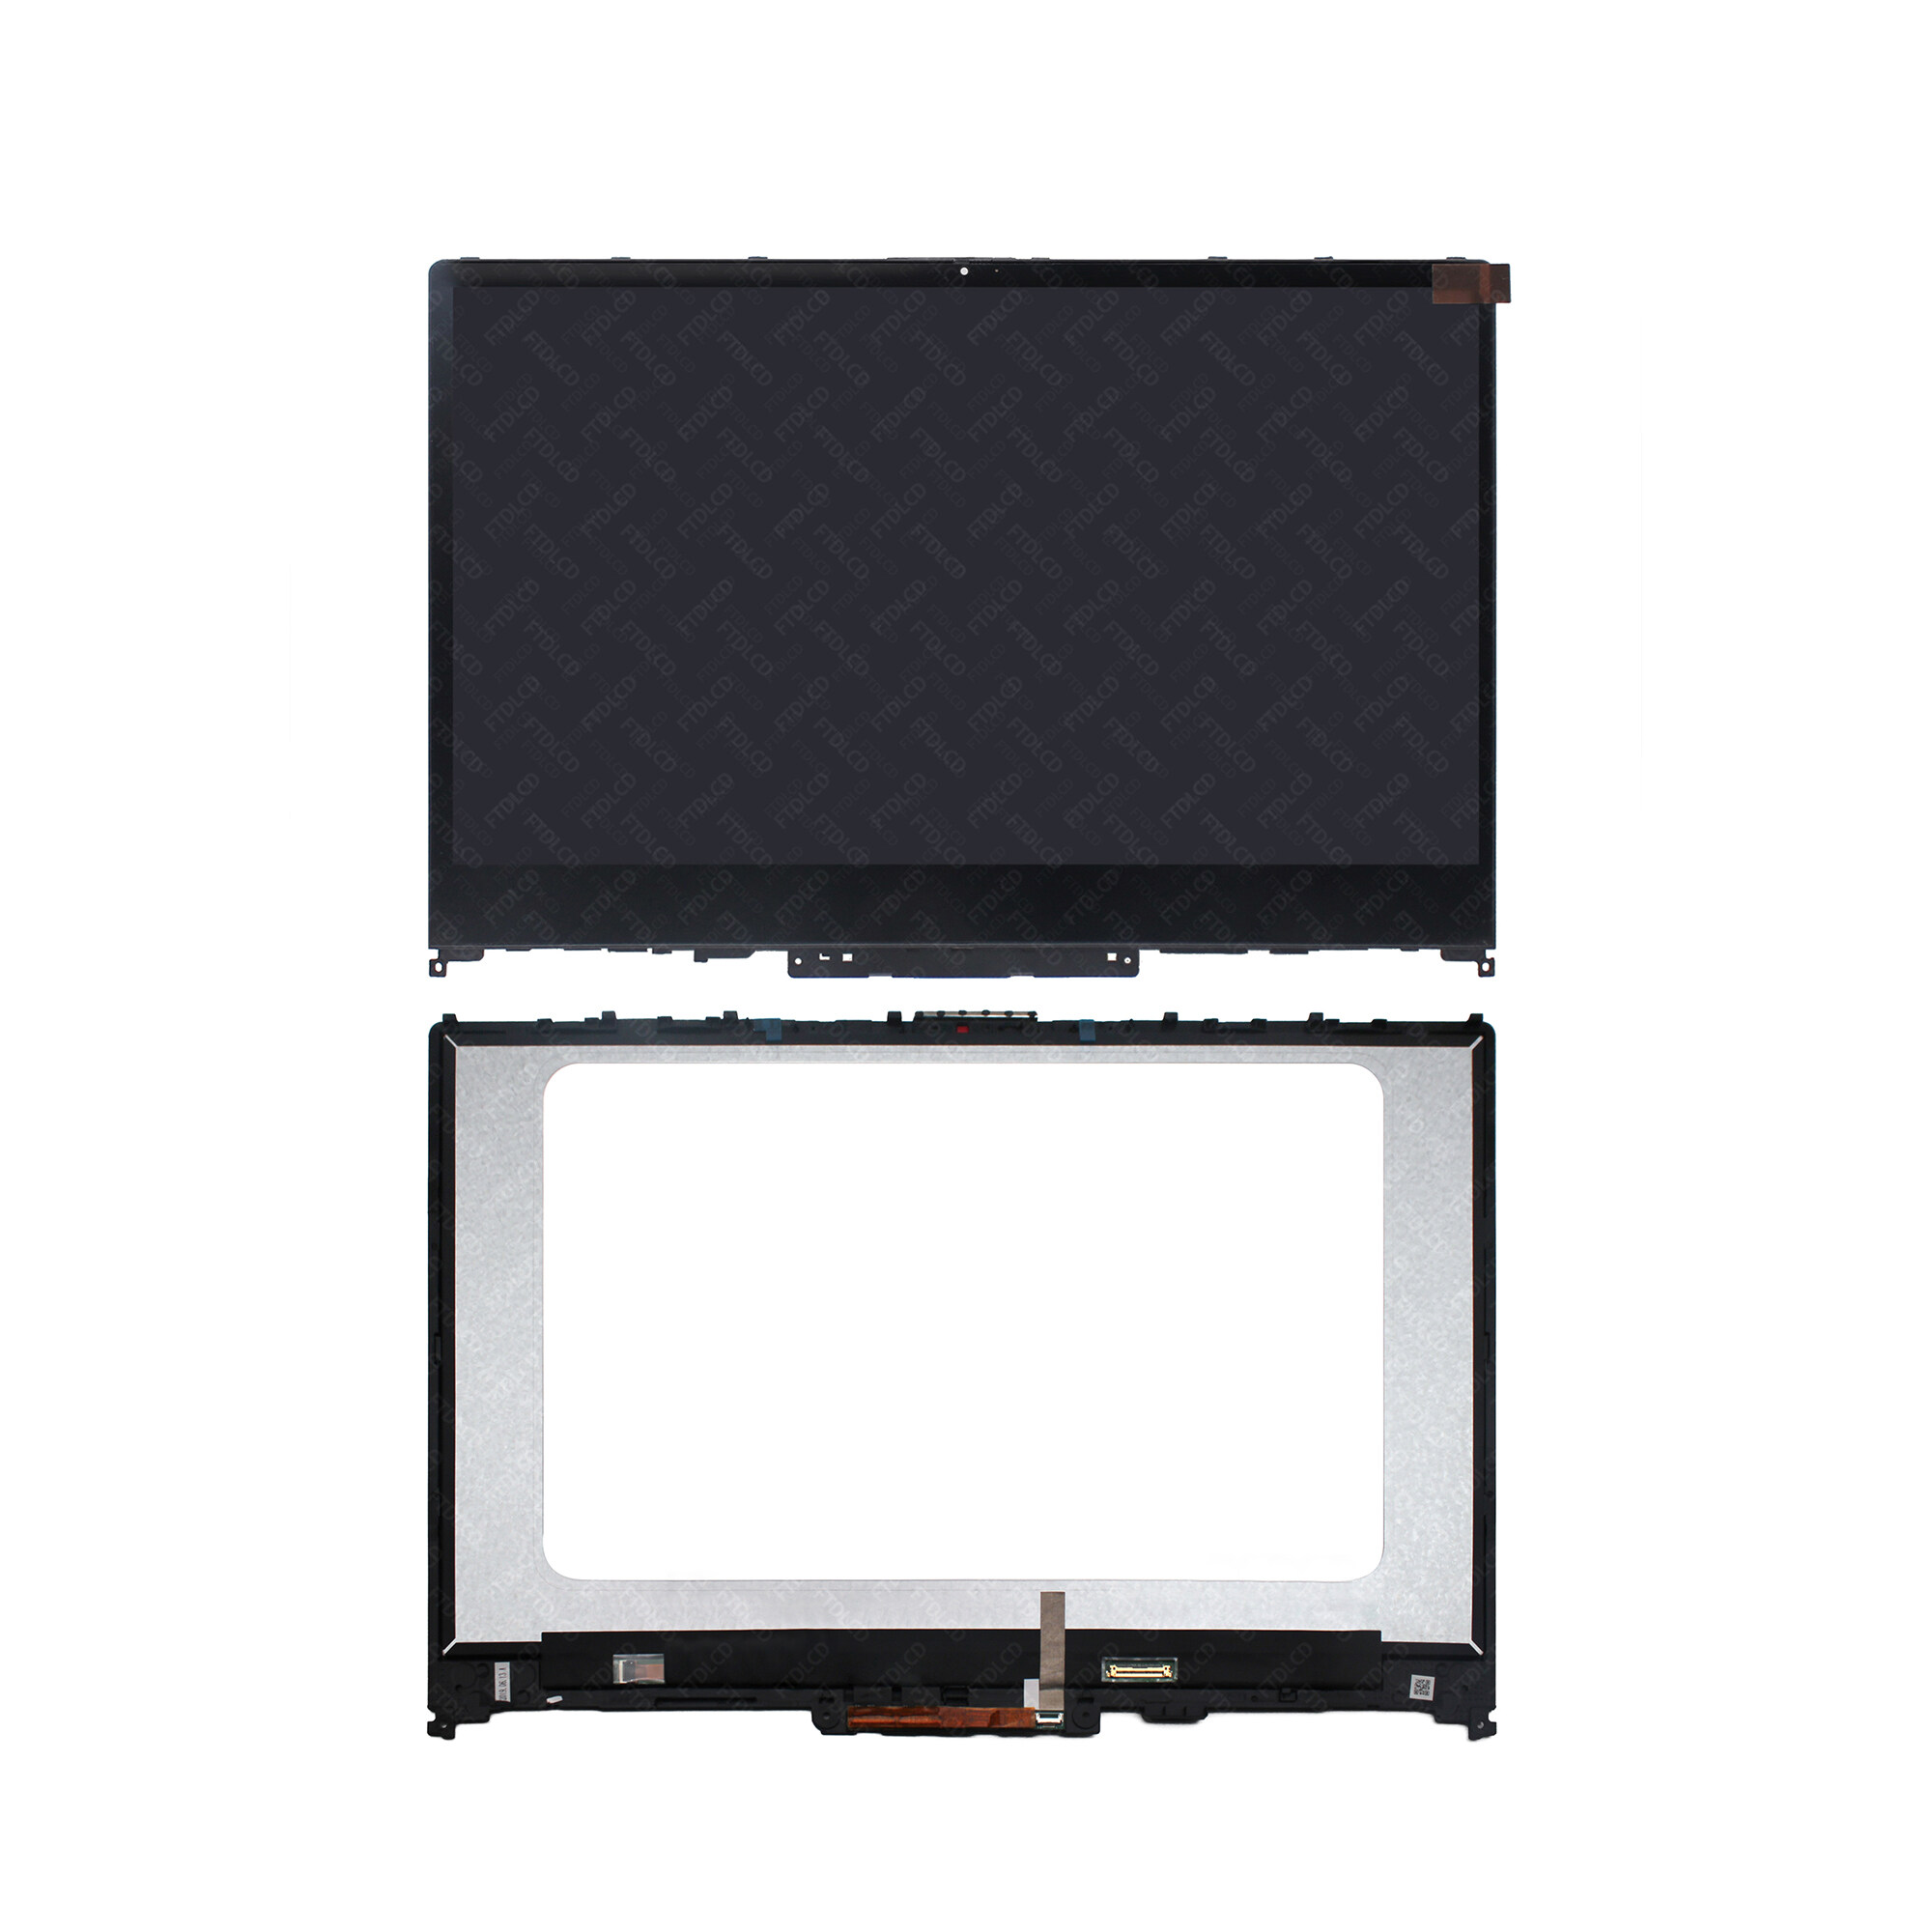 Kreplacement FHD LCD Touch Screen Digitizer Display for Lenovo IdeaPad C340-15IWL 5D10S39565